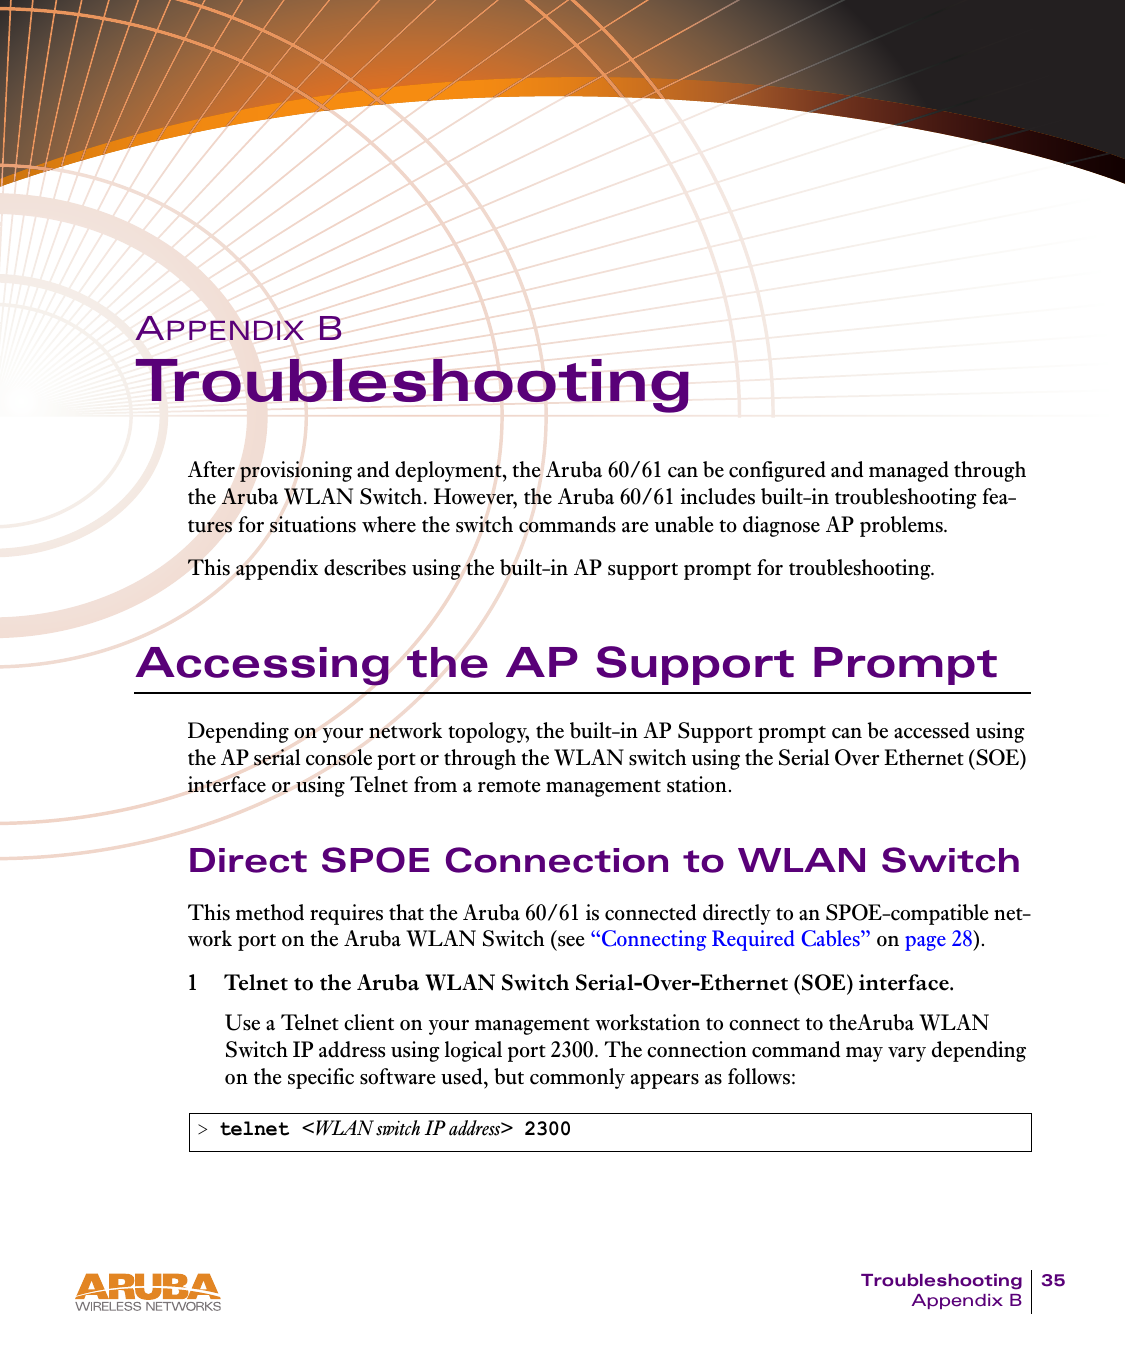 Troubleshooting 35Appendix BAPPENDIX BTroubleshootingAfter provisioning and deployment, the Aruba 60/61 can be configured and managed through the Aruba WLAN Switch. However, the Aruba 60/61 includes built-in troubleshooting fea-tures for situations where the switch commands are unable to diagnose AP problems.This appendix describes using the built-in AP support prompt for troubleshooting.Accessing the AP Support PromptDepending on your network topology, the built-in AP Support prompt can be accessed using the AP serial console port or through the WLAN switch using the Serial Over Ethernet (SOE) interface or using Telnet from a remote management station.Direct SPOE Connection to WLAN SwitchThis method requires that the Aruba 60/61 is connected directly to an SPOE-compatible net-work port on the Aruba WLAN Switch (see “Connecting Required Cables” on page 28).1 Telnet to the Aruba WLAN Switch Serial-Over-Ethernet (SOE) interface.Use a Telnet client on your management workstation to connect to theAruba WLAN Switch IP address using logical port 2300. The connection command may vary depending on the specific software used, but commonly appears as follows:&gt; telnet &lt;WLAN switch IP address&gt; 2300